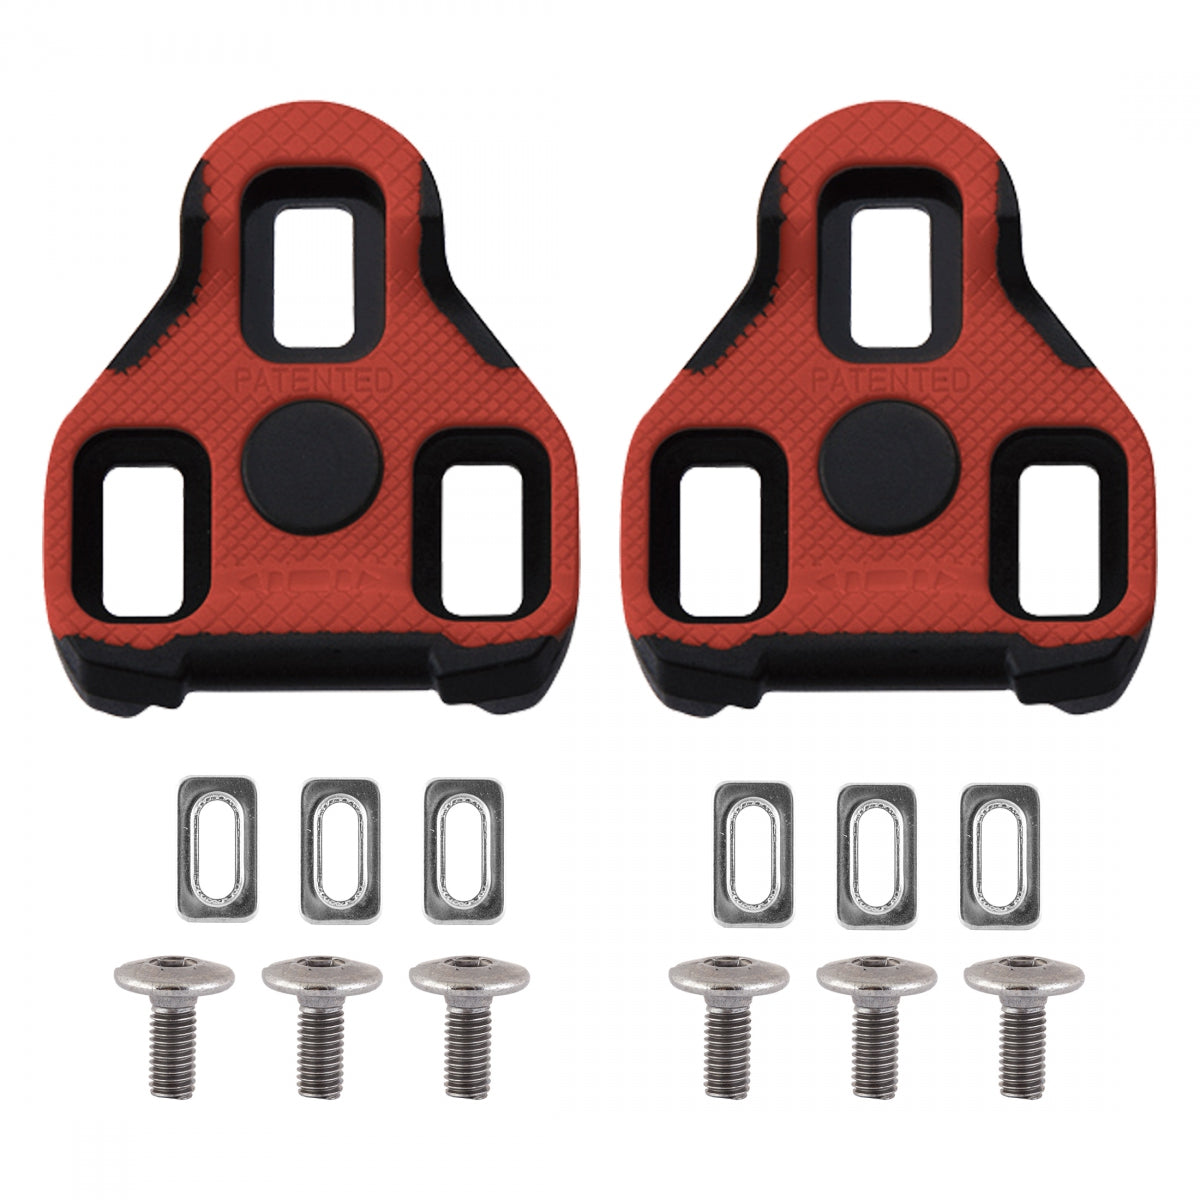 Pedal Cleat Exustar Arc11+ Keo Look Float Red